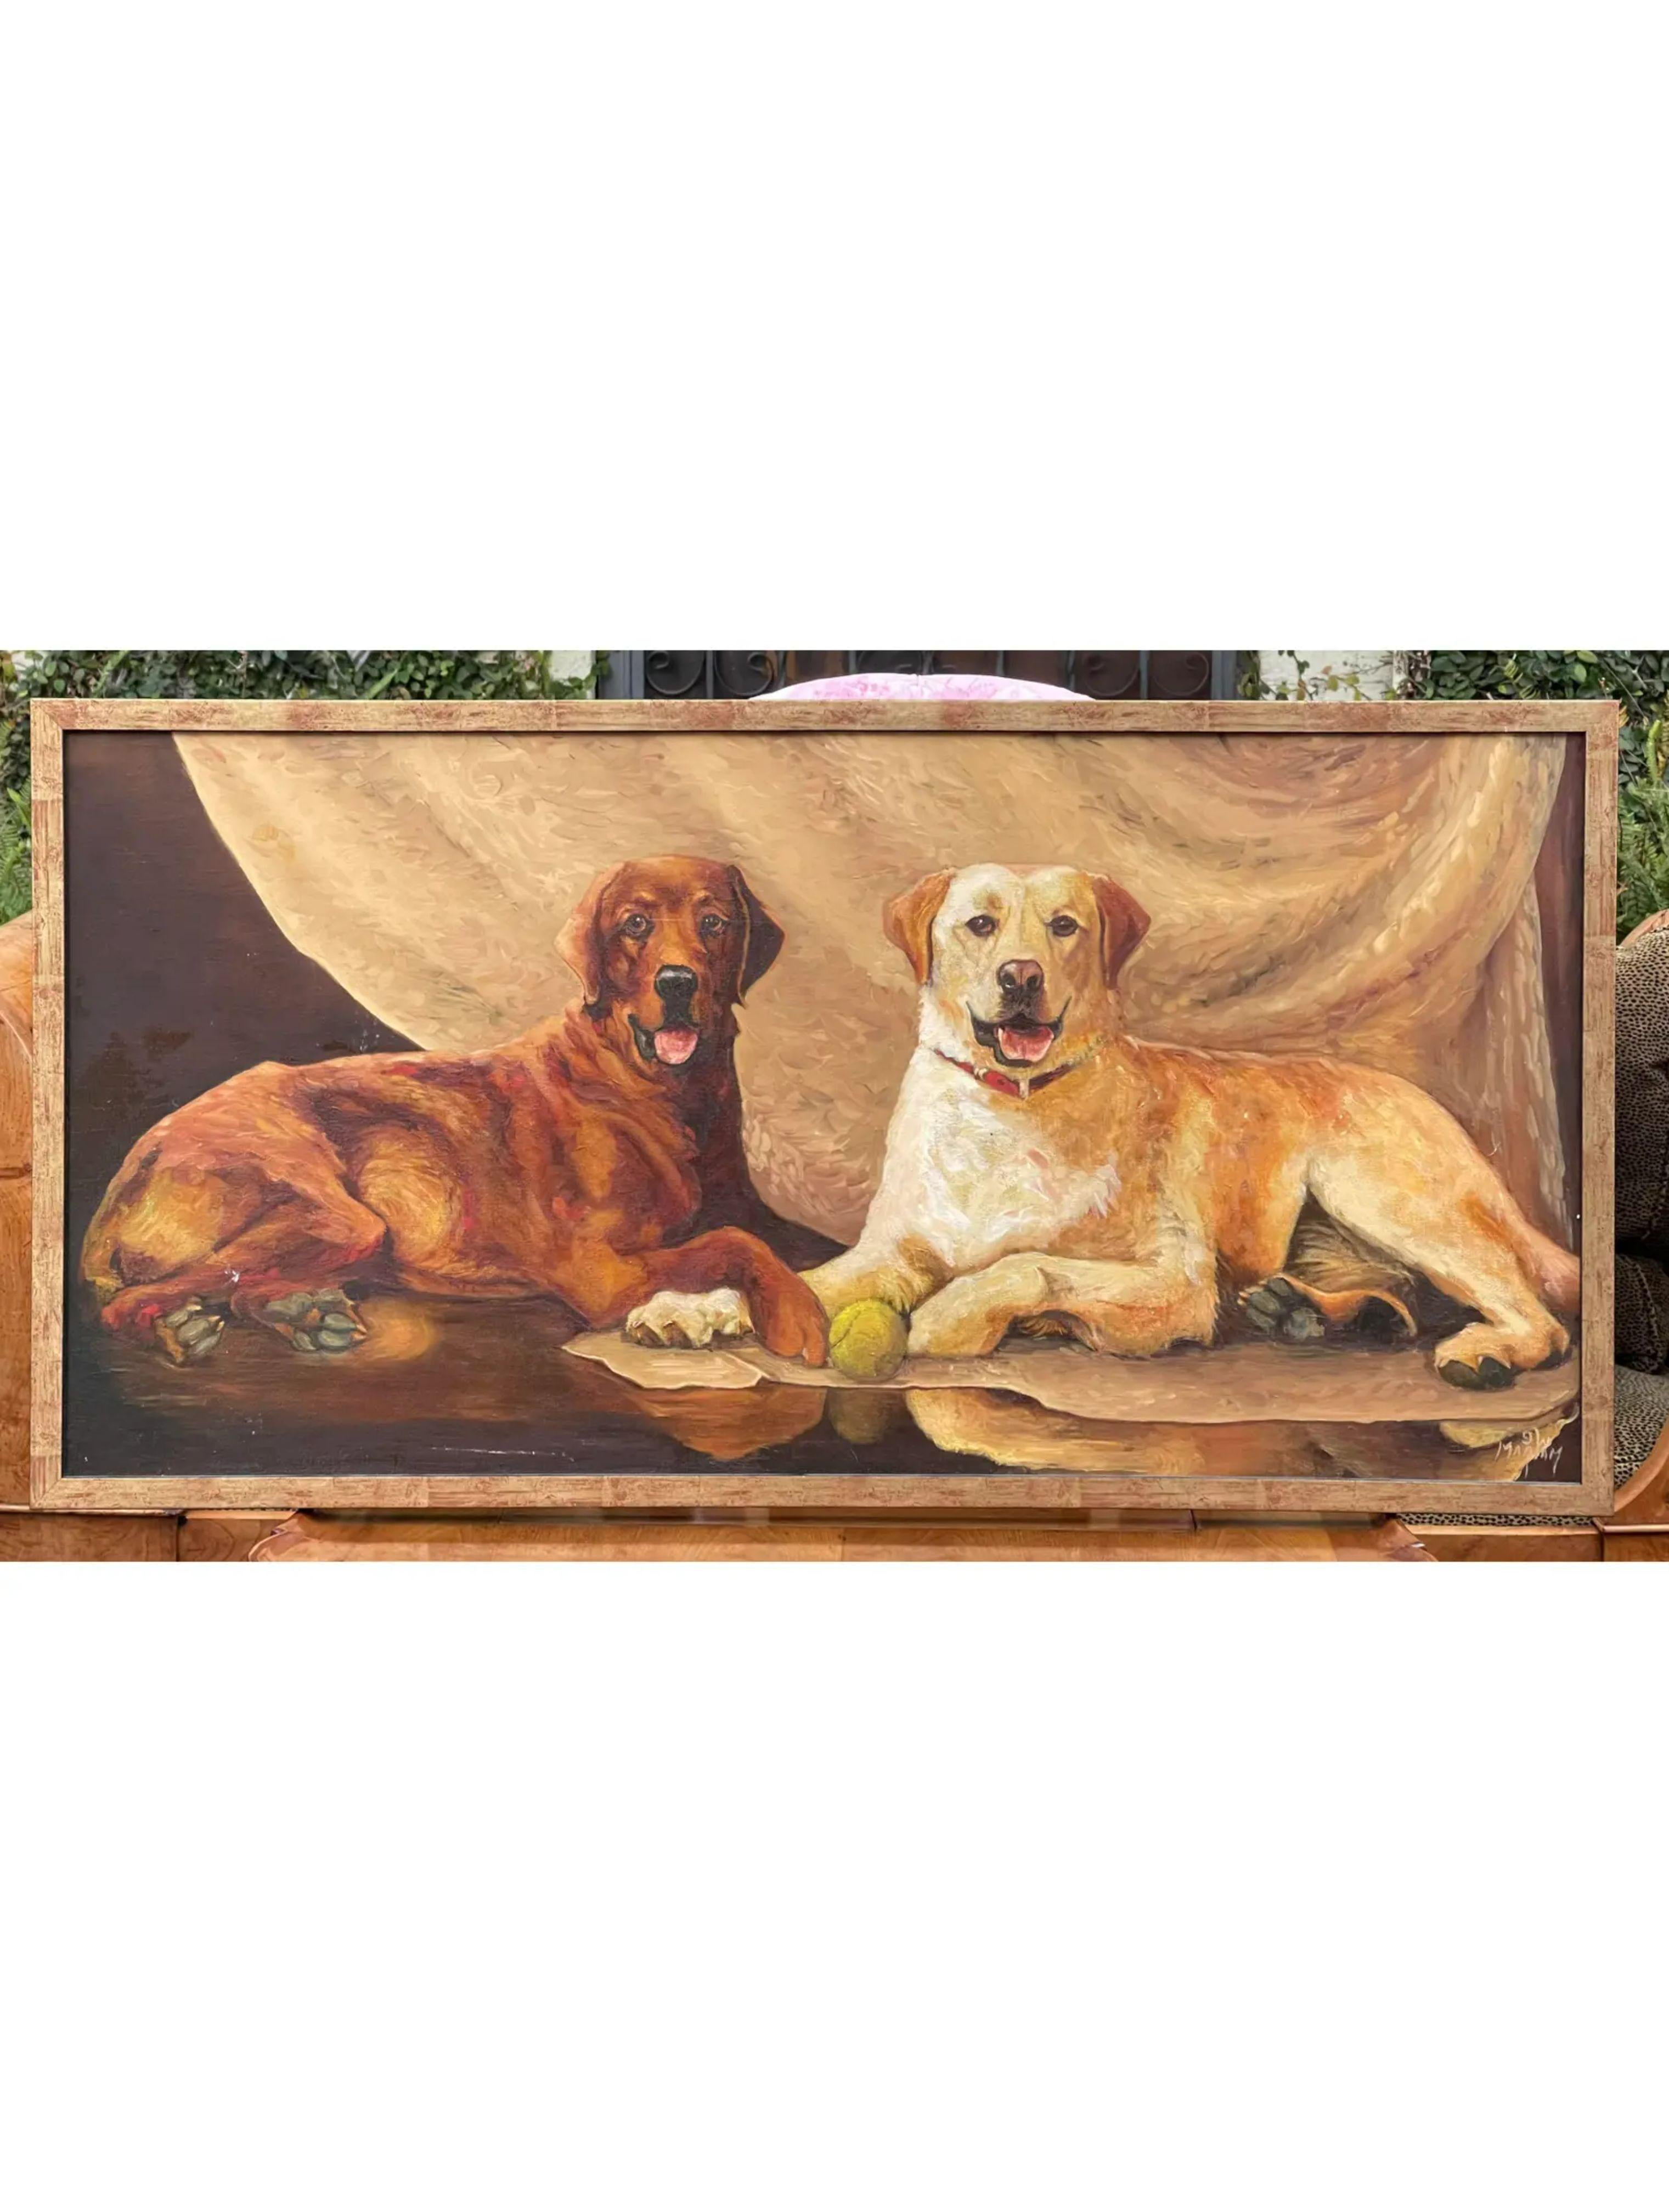 Canvas Vintage Original Oil Painting of 2 Dogs, 1980s